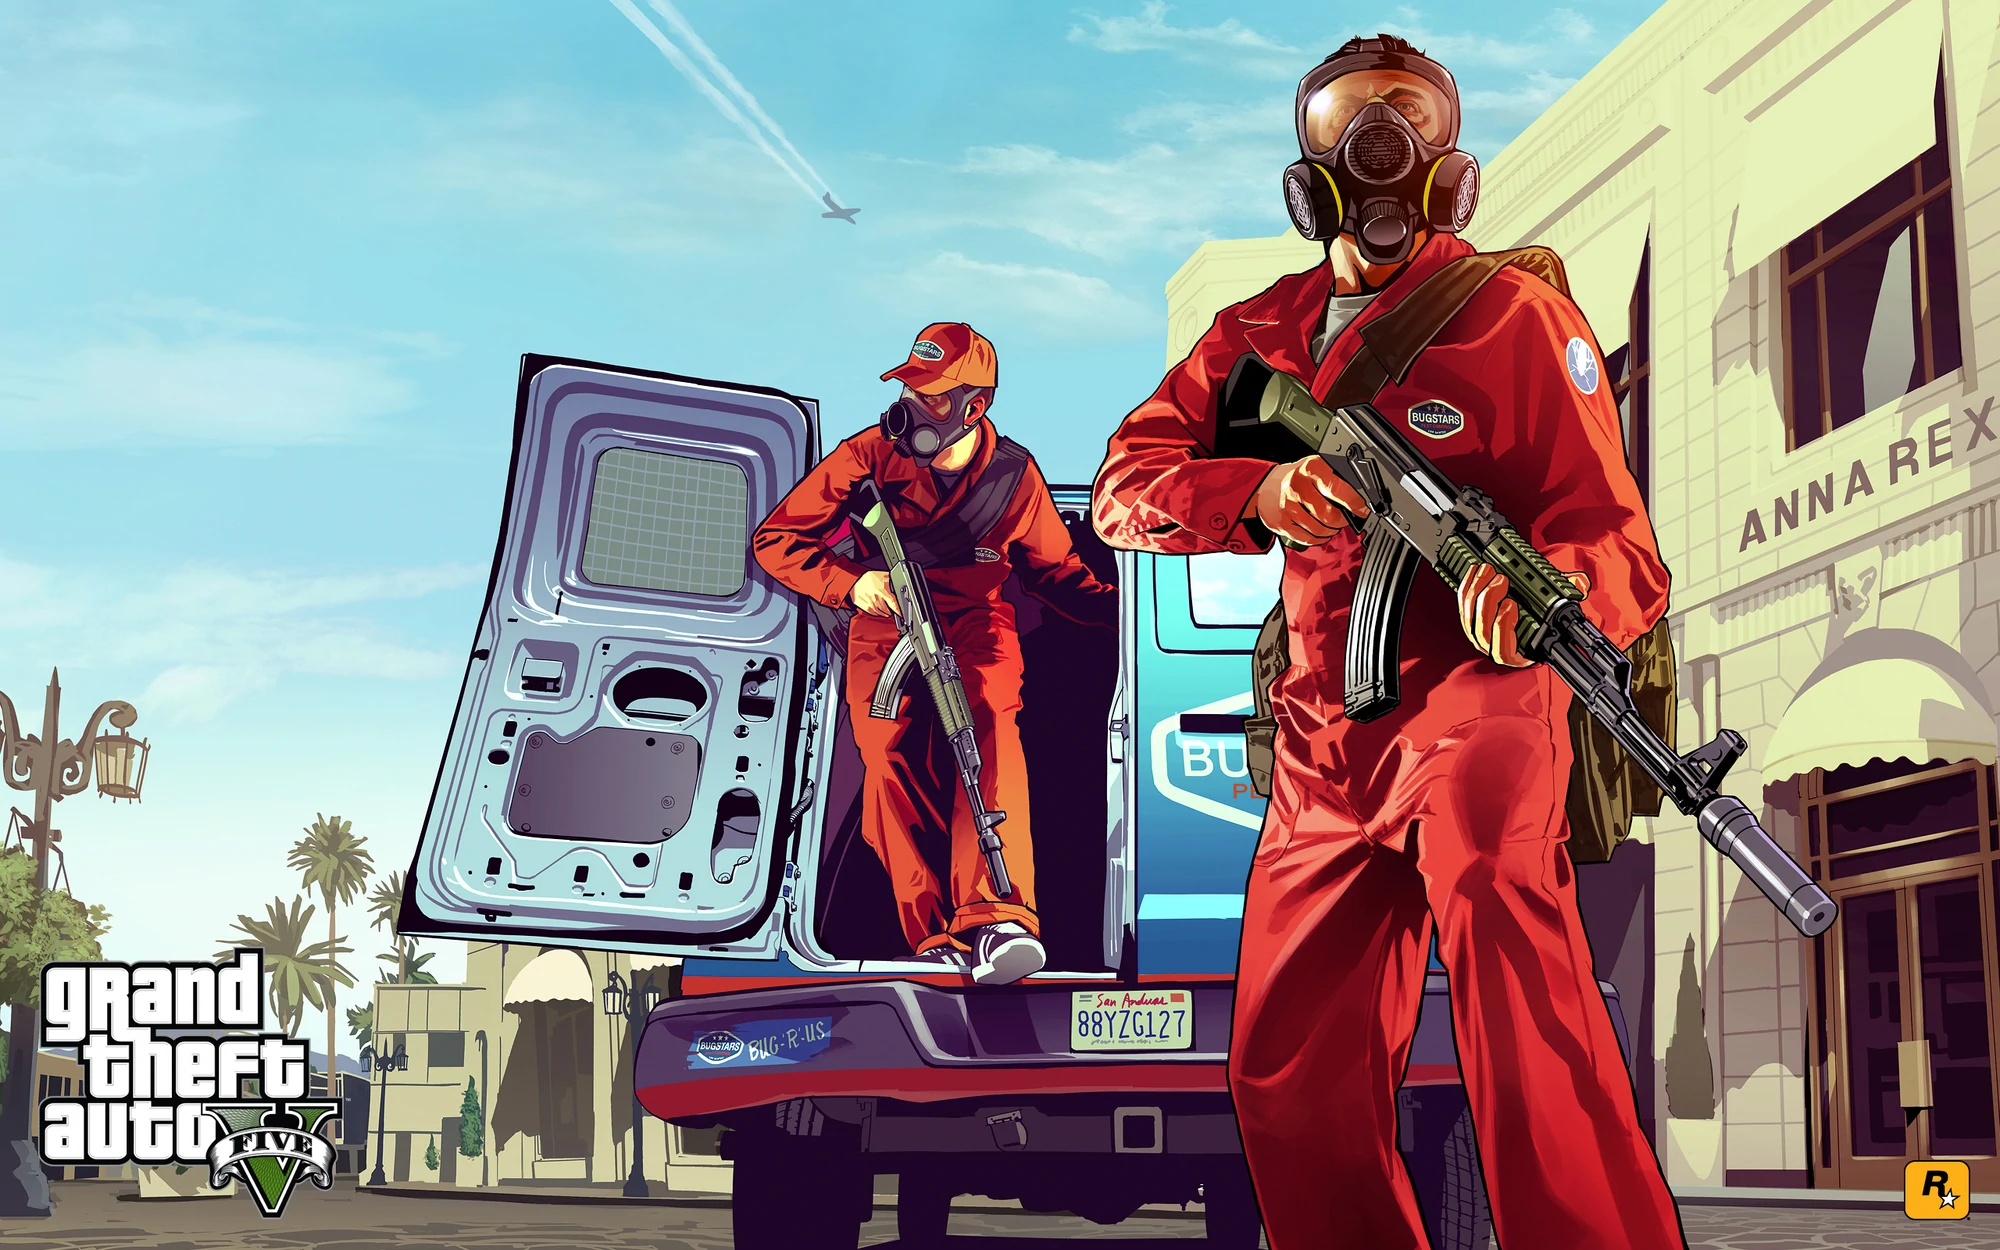 GTA V is the 2nd most downloaded PS4 game in the past month - RockstarINTEL